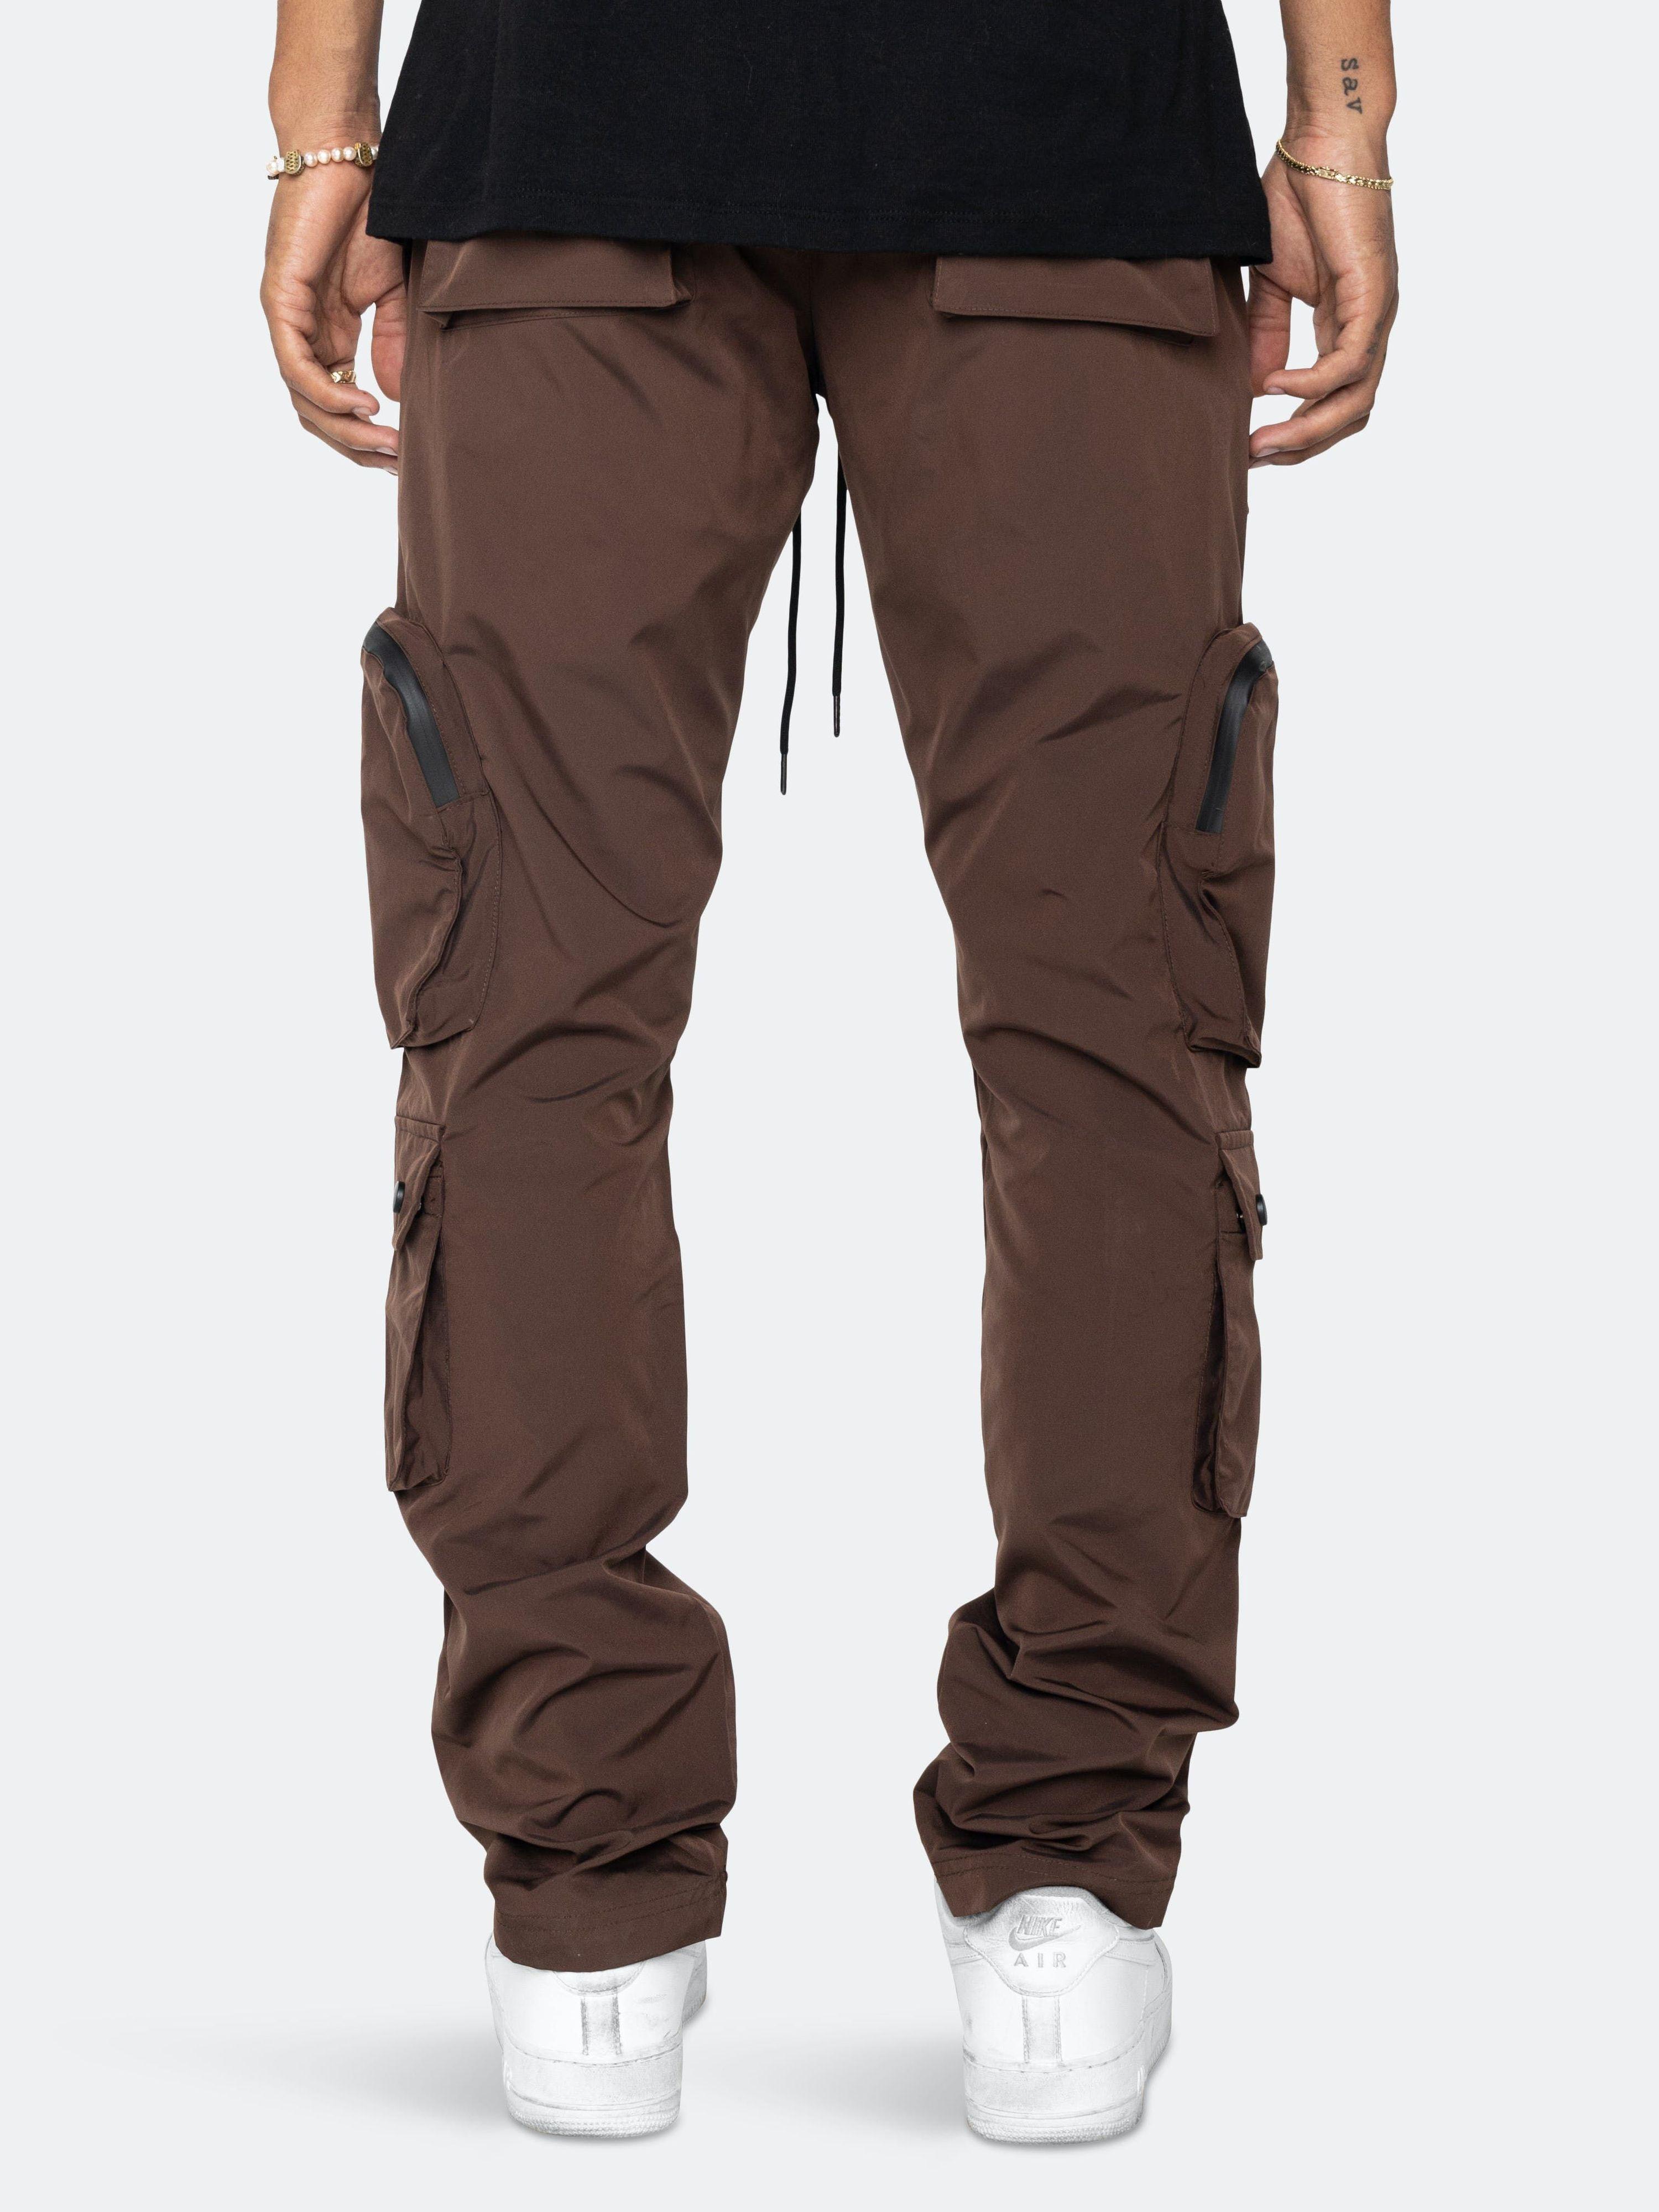 Eptm Dave East Dope Boy Cargos in Brown for Men